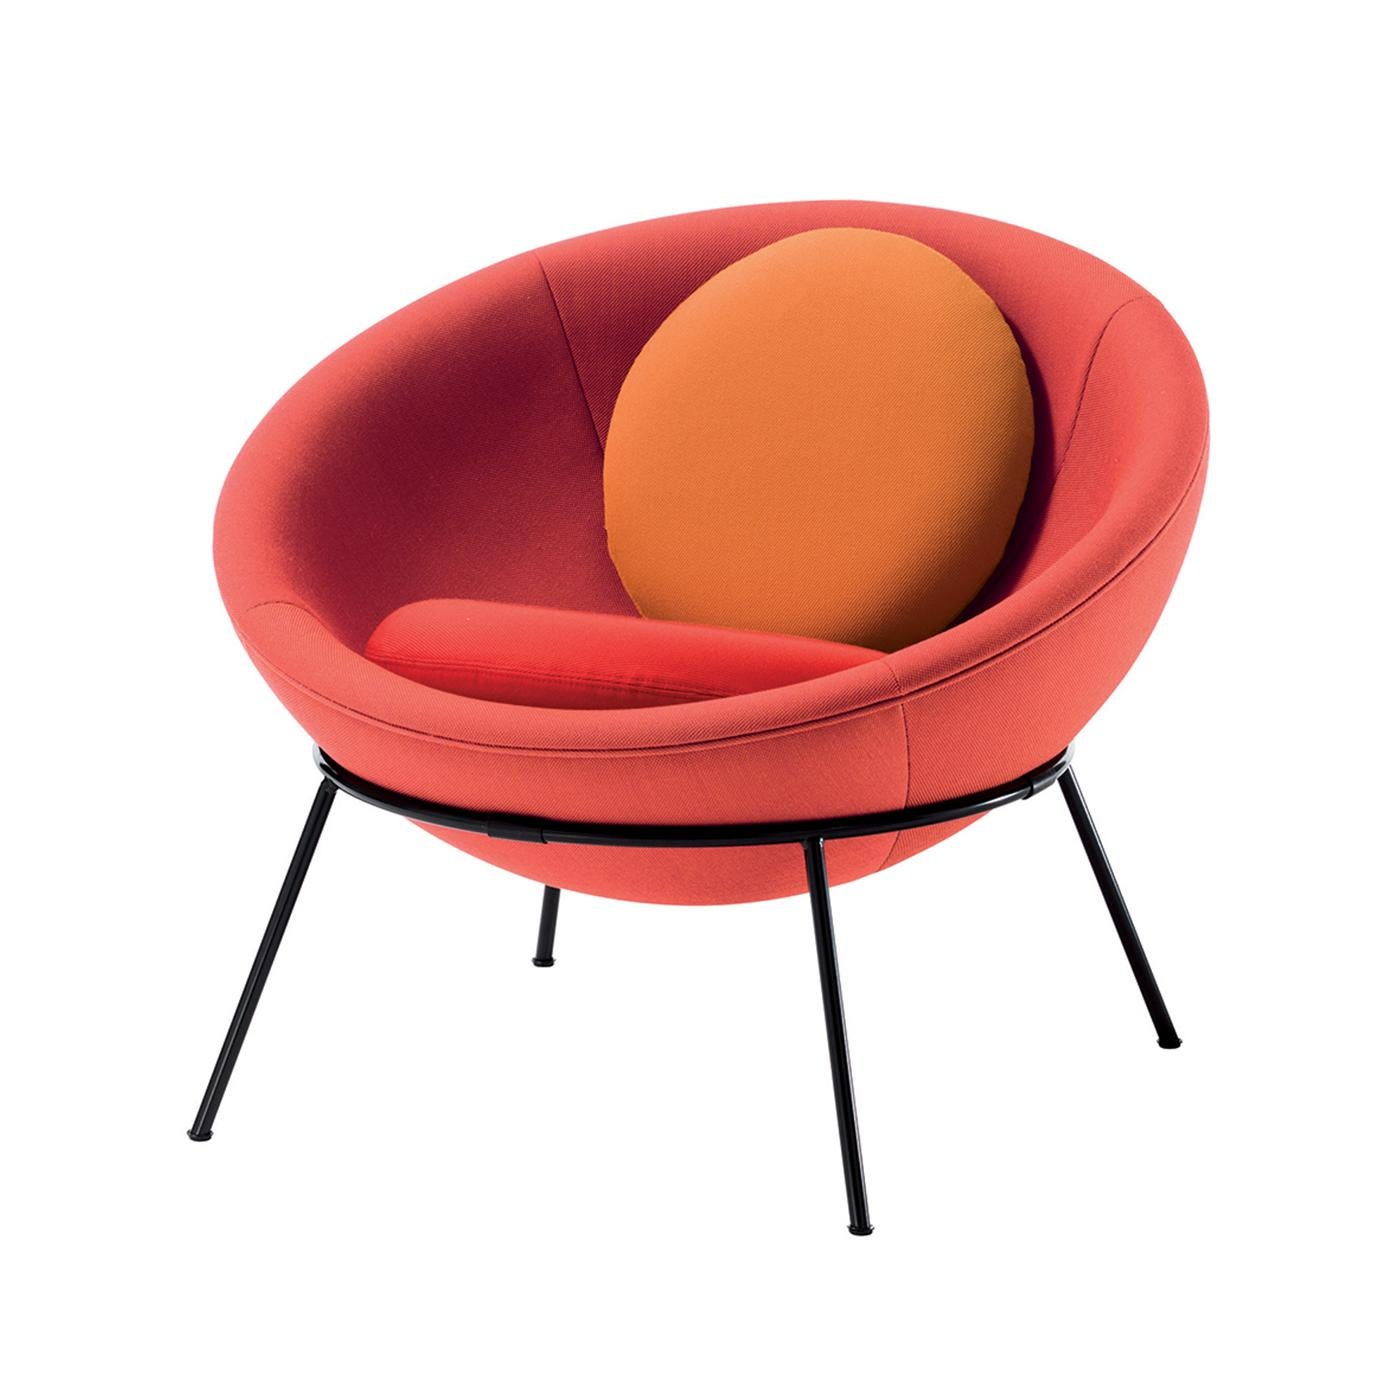 Designed in 1951 by Lina Bo Bardi, the Bardi’s bowl chair is considered a modern design icon. Conceived with an essential frame and universal shape, a semi spherical seat resting lightly on a metallic ring structure supported by four legs, it